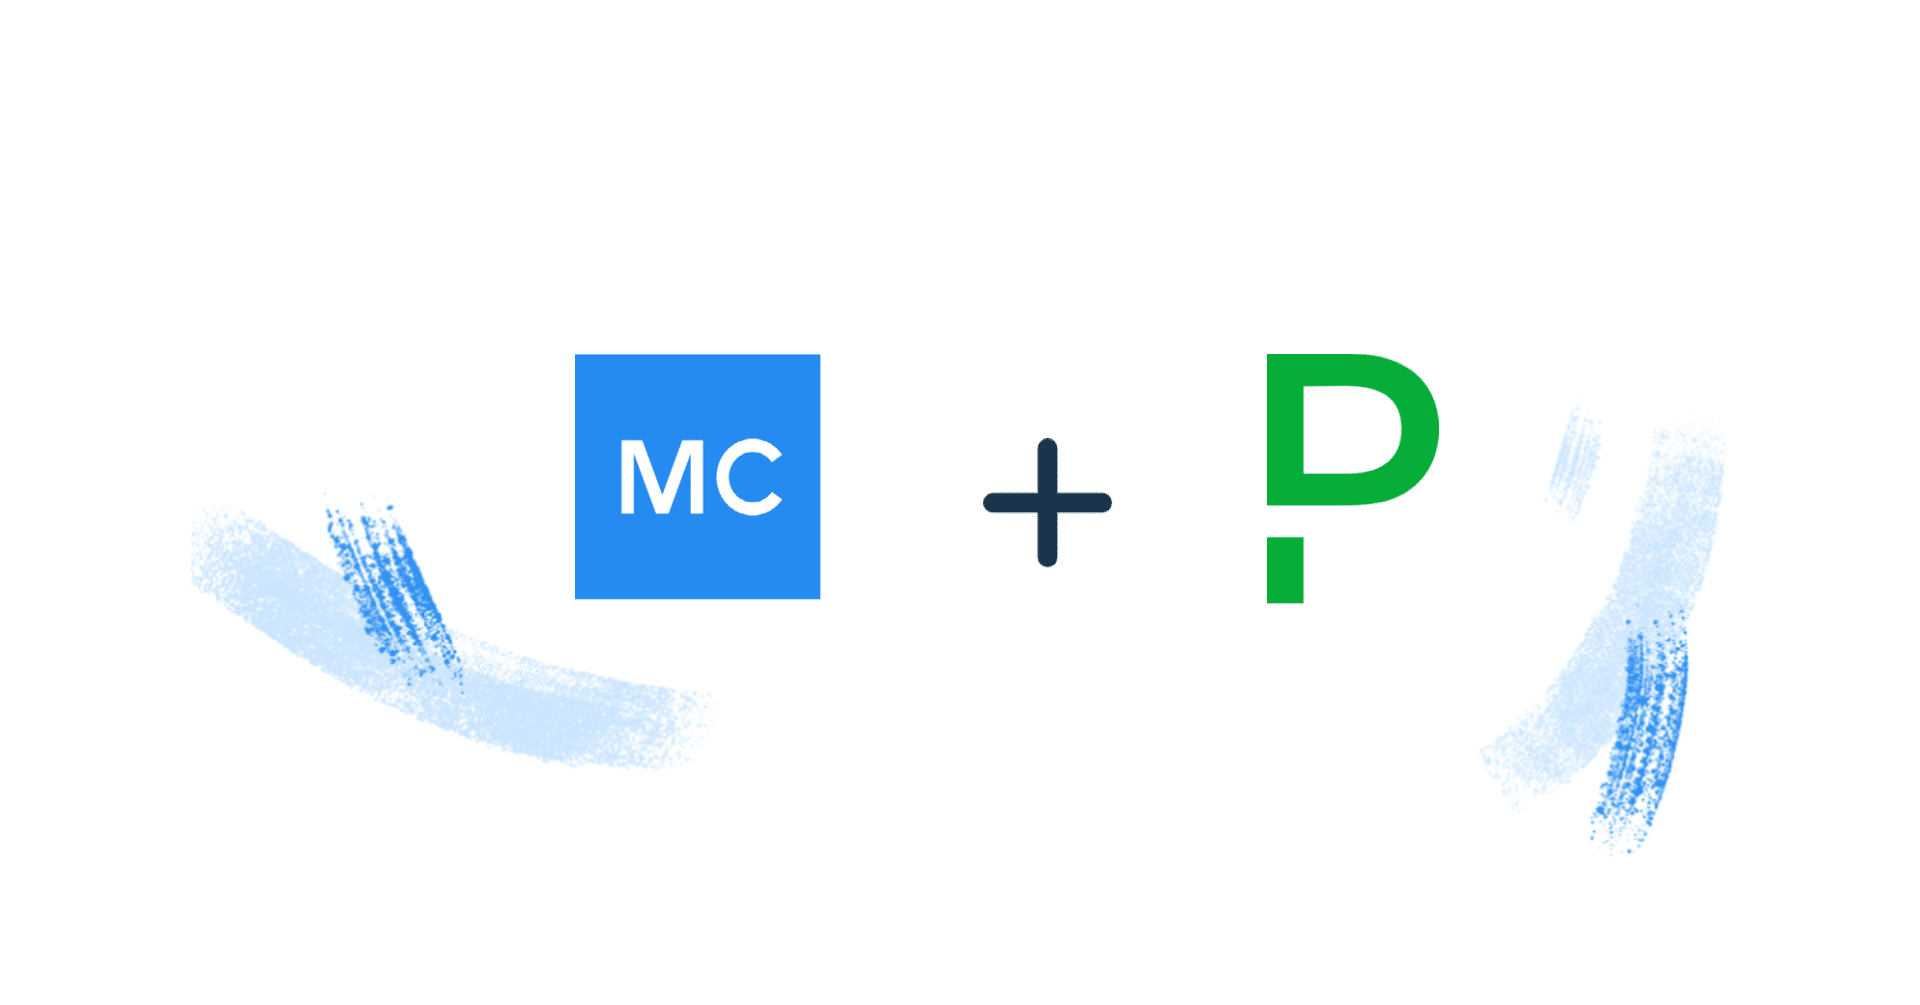 Monte Carlo and PagerDuty Integration Brings DevOps to Data Pipelines with End-to-End Data Observability